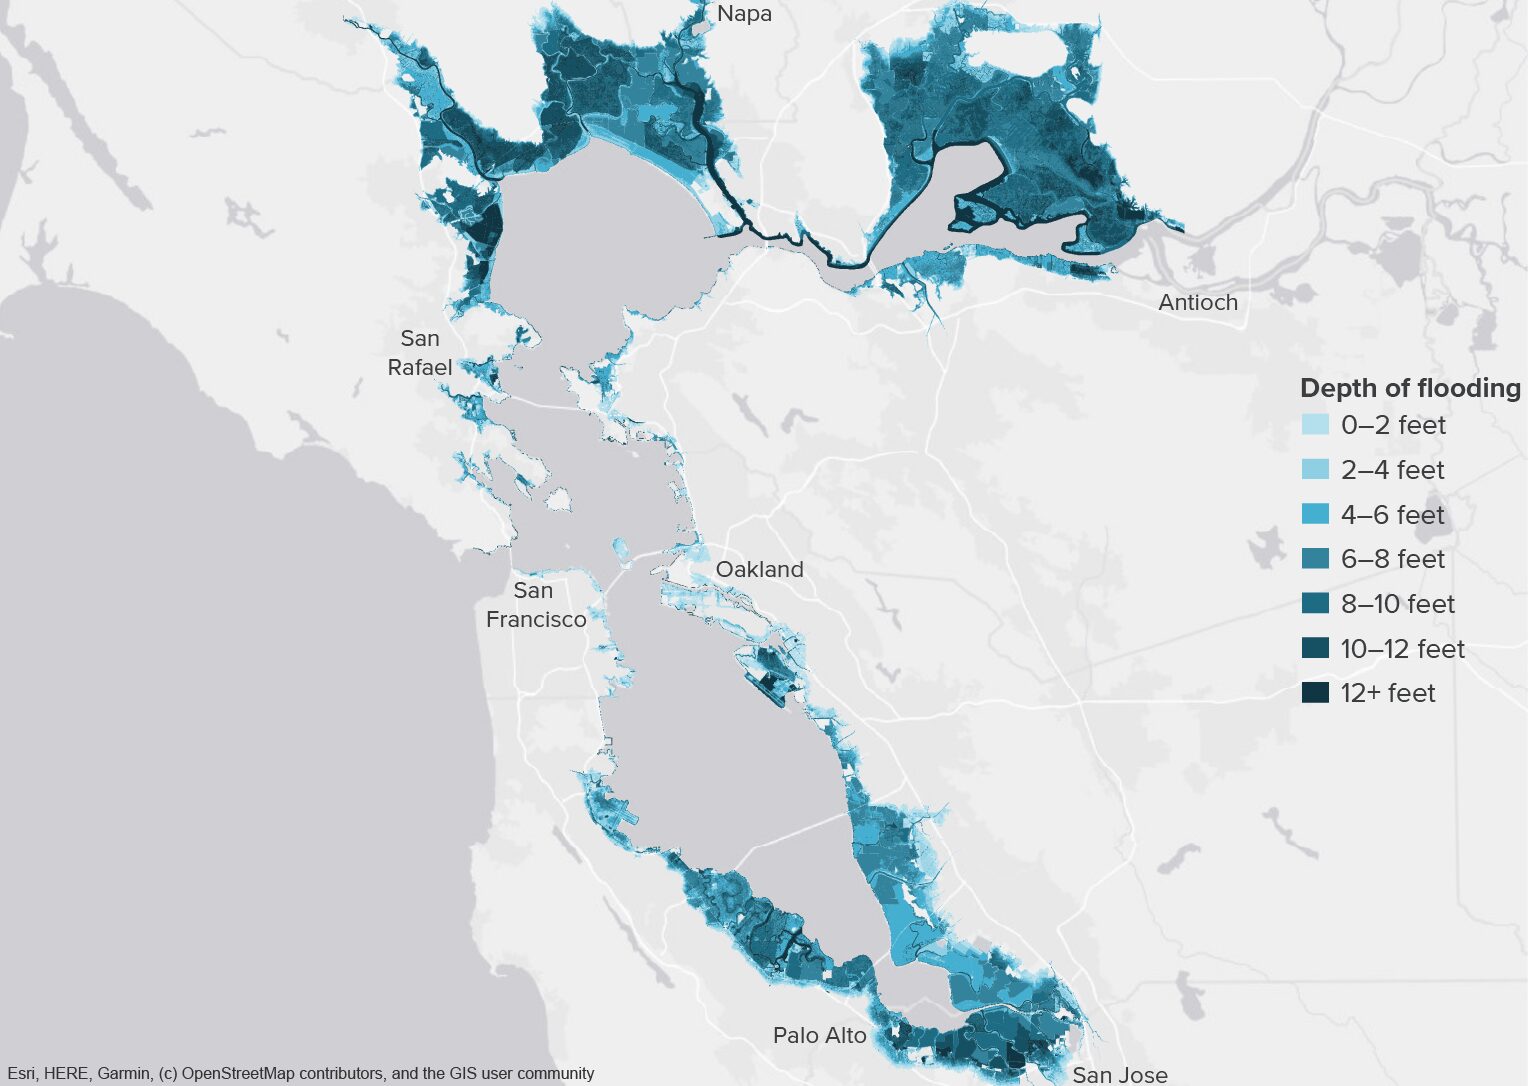 figure - Coastal flooding in the Bay Area could be widespread with 3 feet of sea level rise